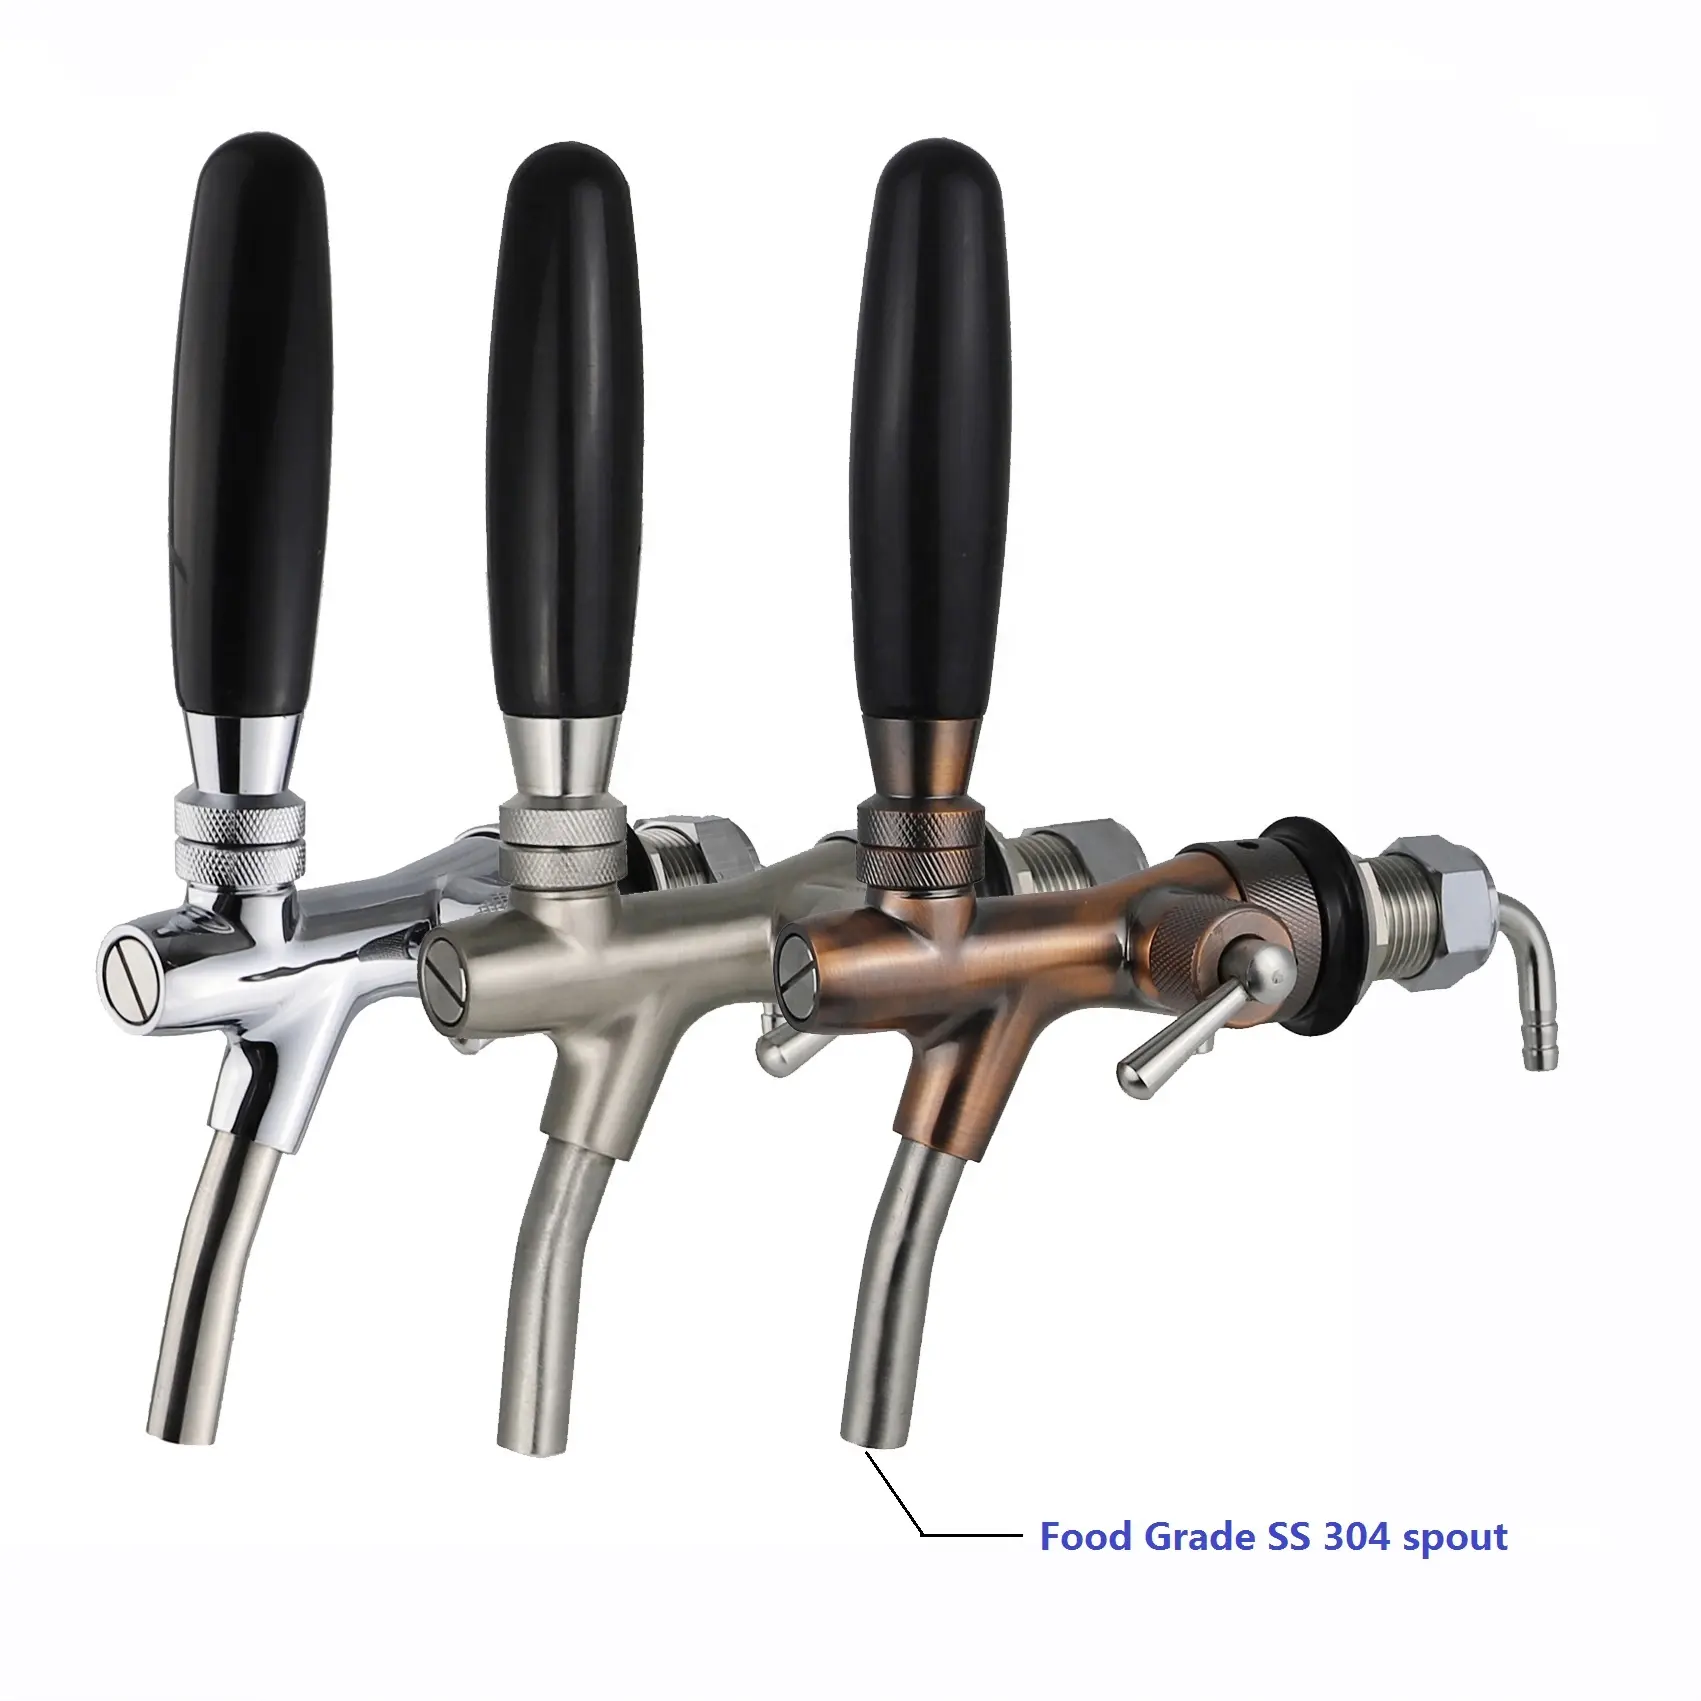 Automatic Adjustable Beer Tap Faucet Stainless Steel Bar Accessories Metal Eco-friendly with Flow Controller CE / EU Stocked